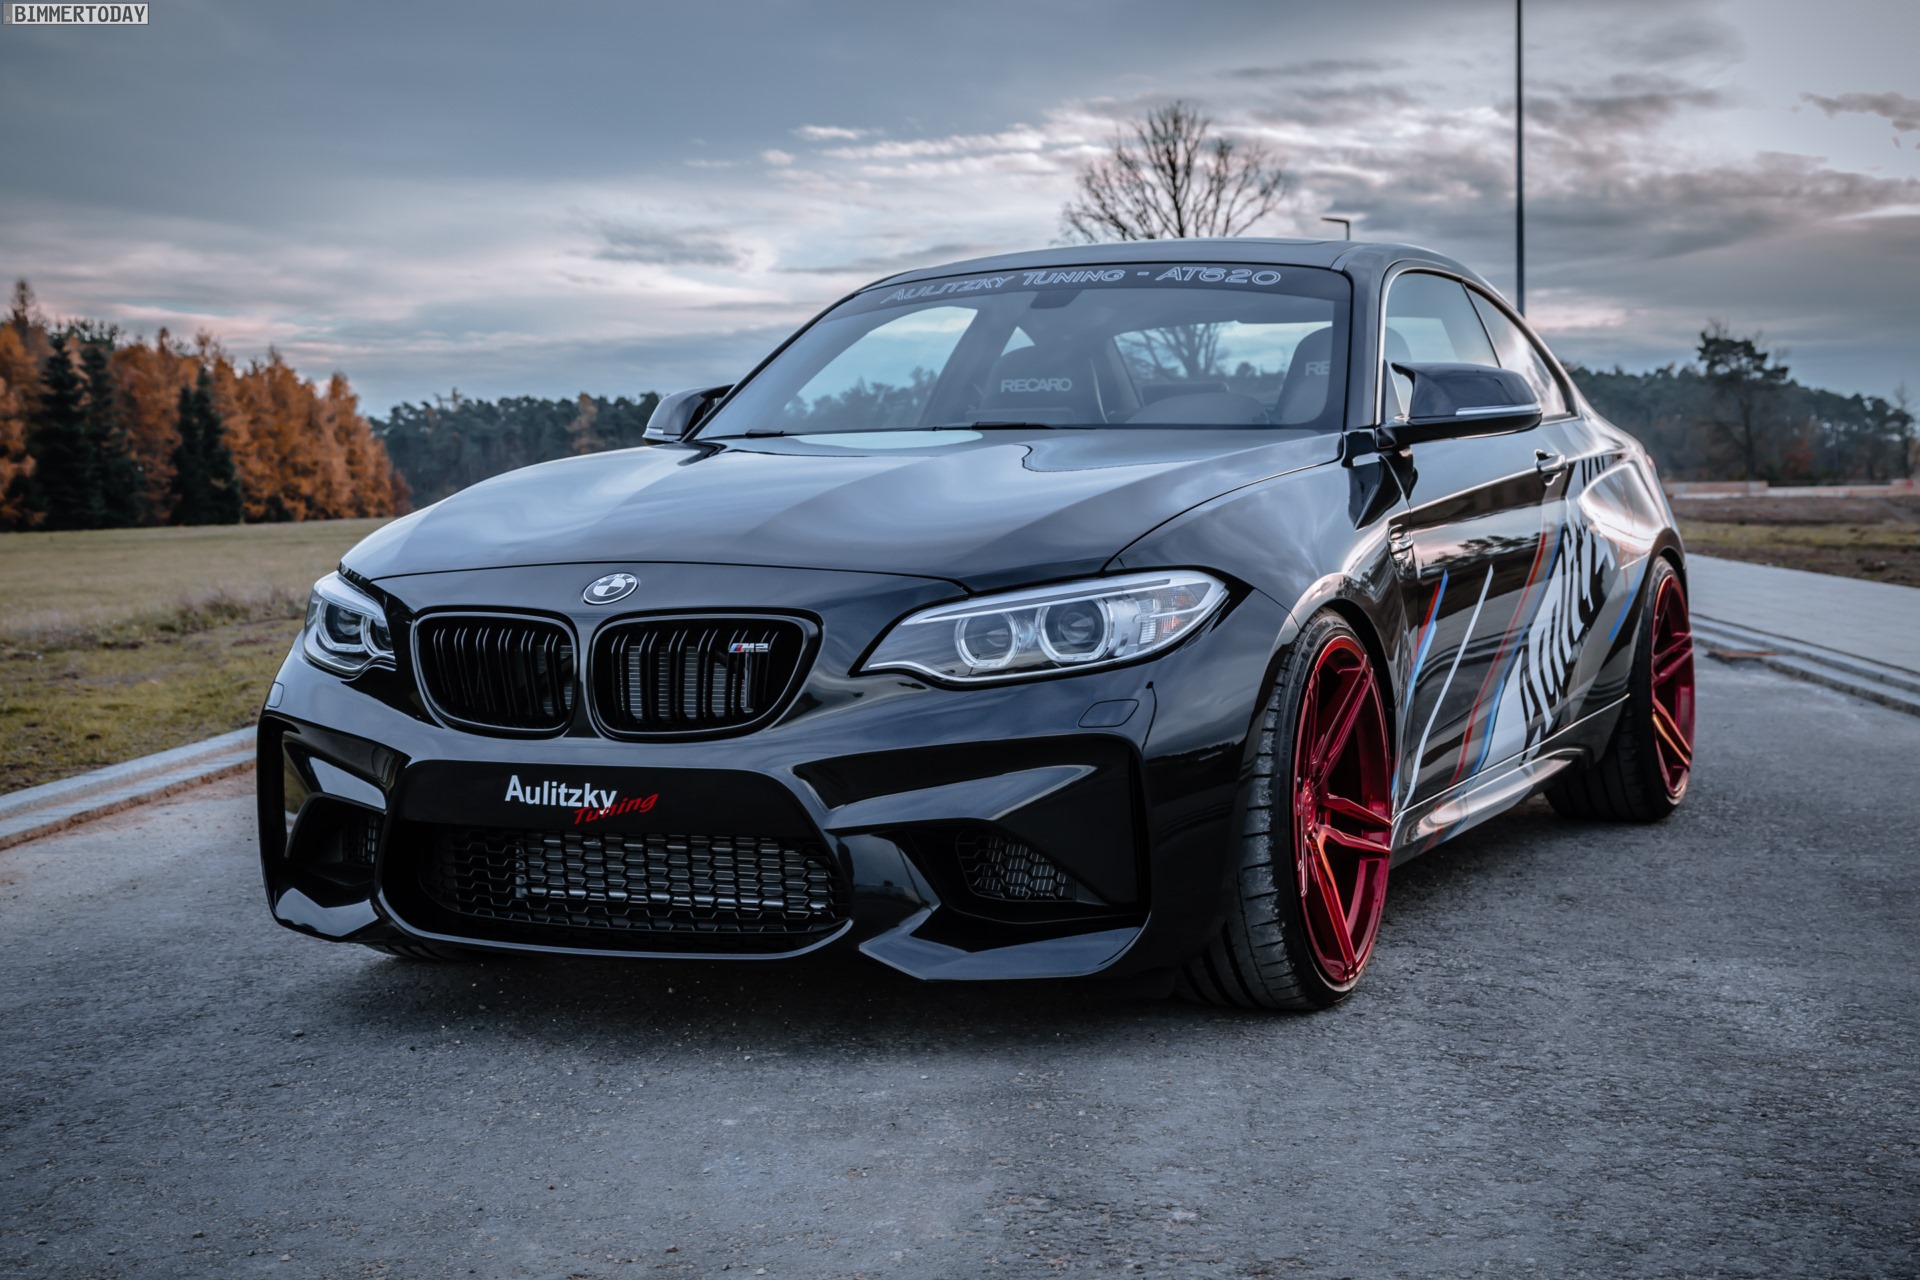 Aulitzky BMW M2 Tuning S55 Motor 10